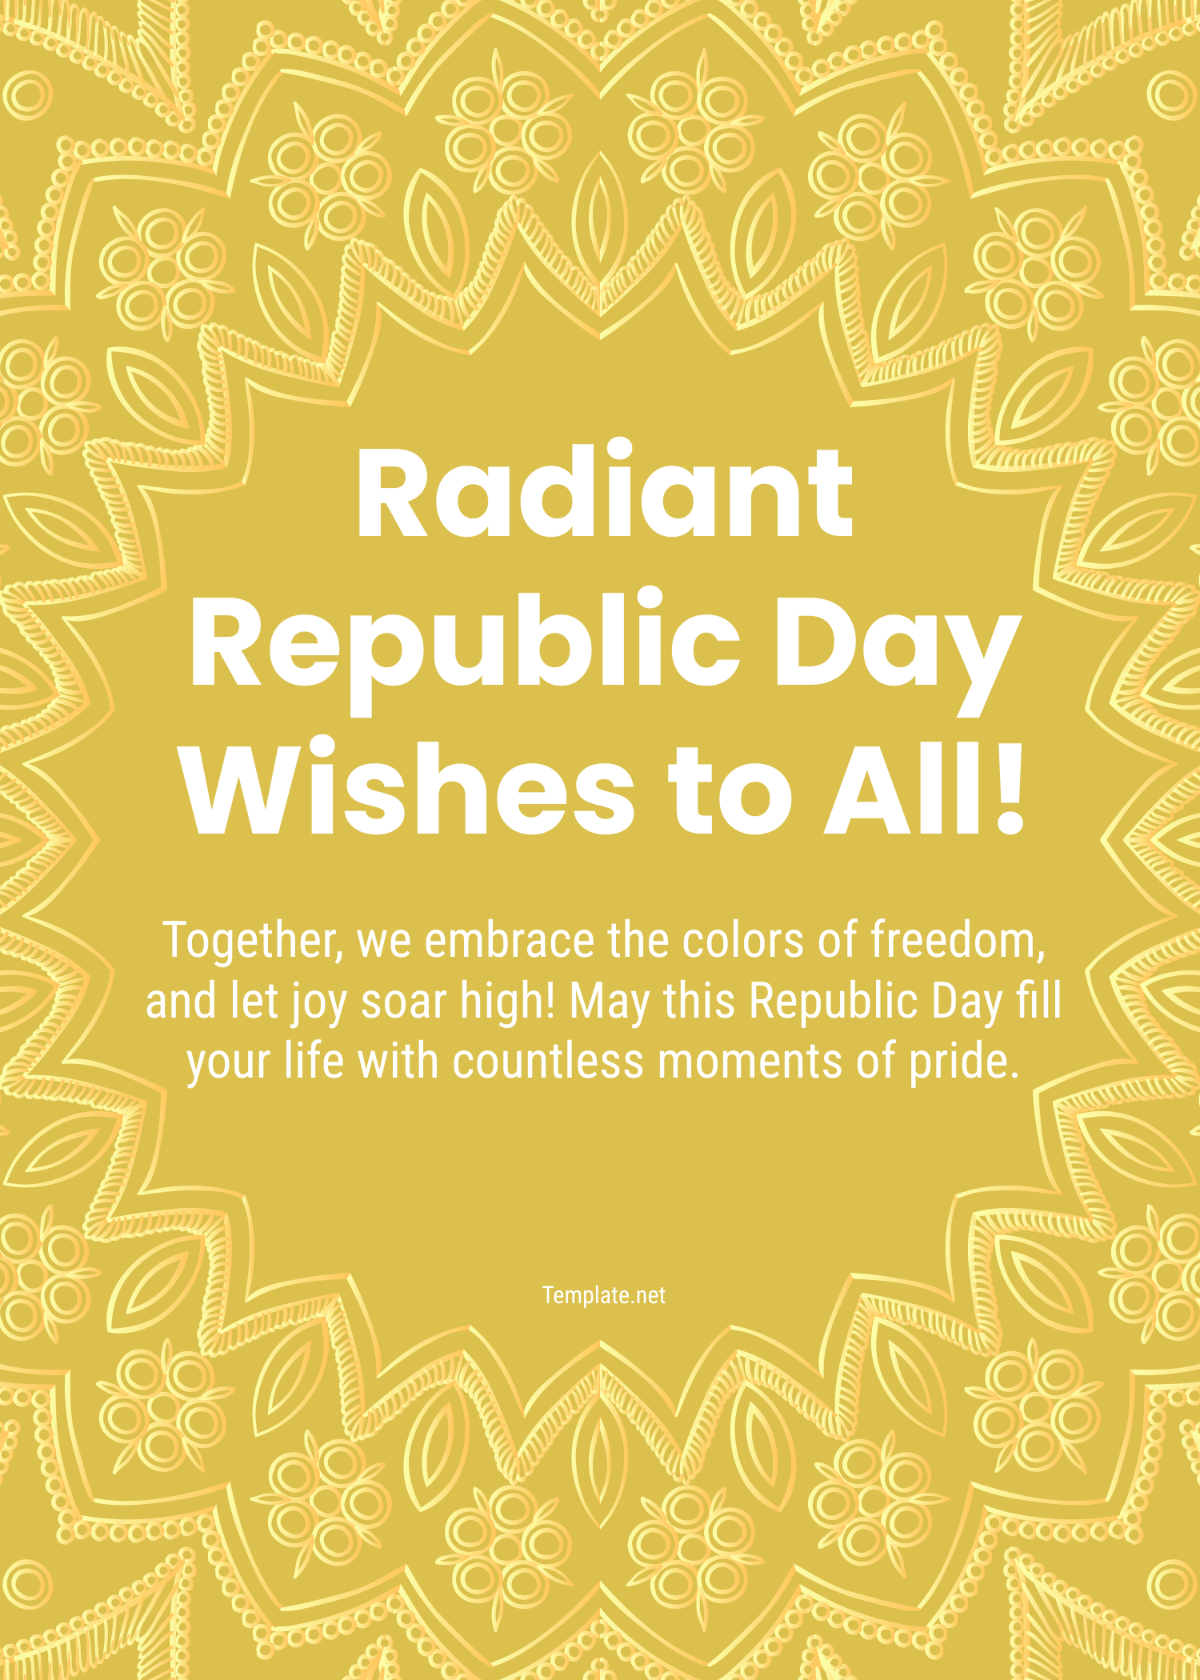 Republic Day Wishes Template